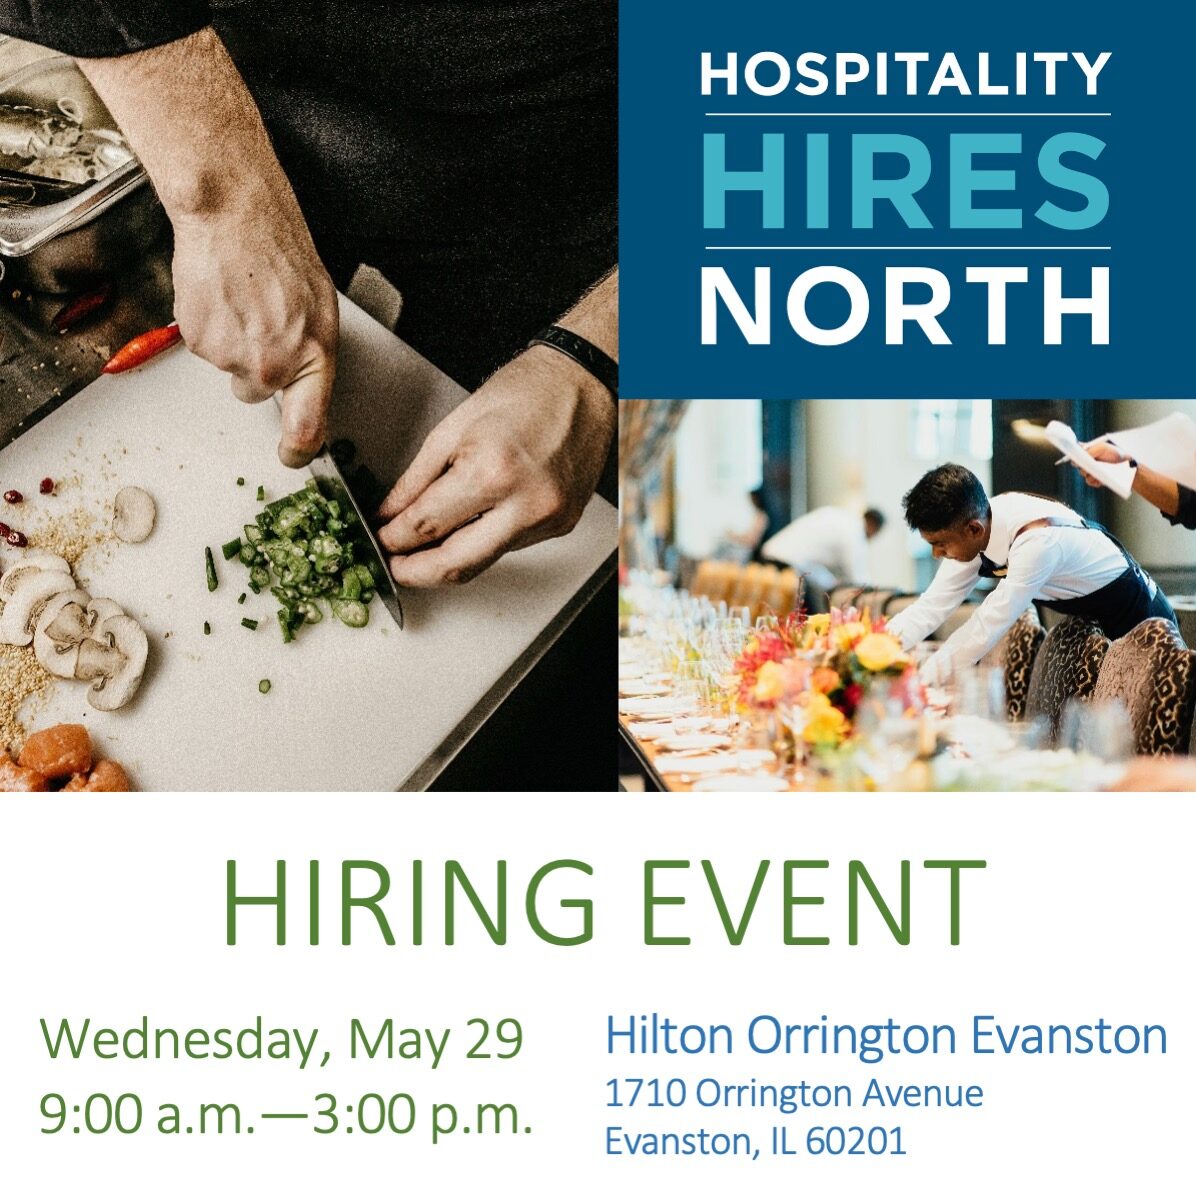 Flyer for Hospitality Hires North. Hiring Event Wednesday, May 29 at Hilton Orrington / Evanston.